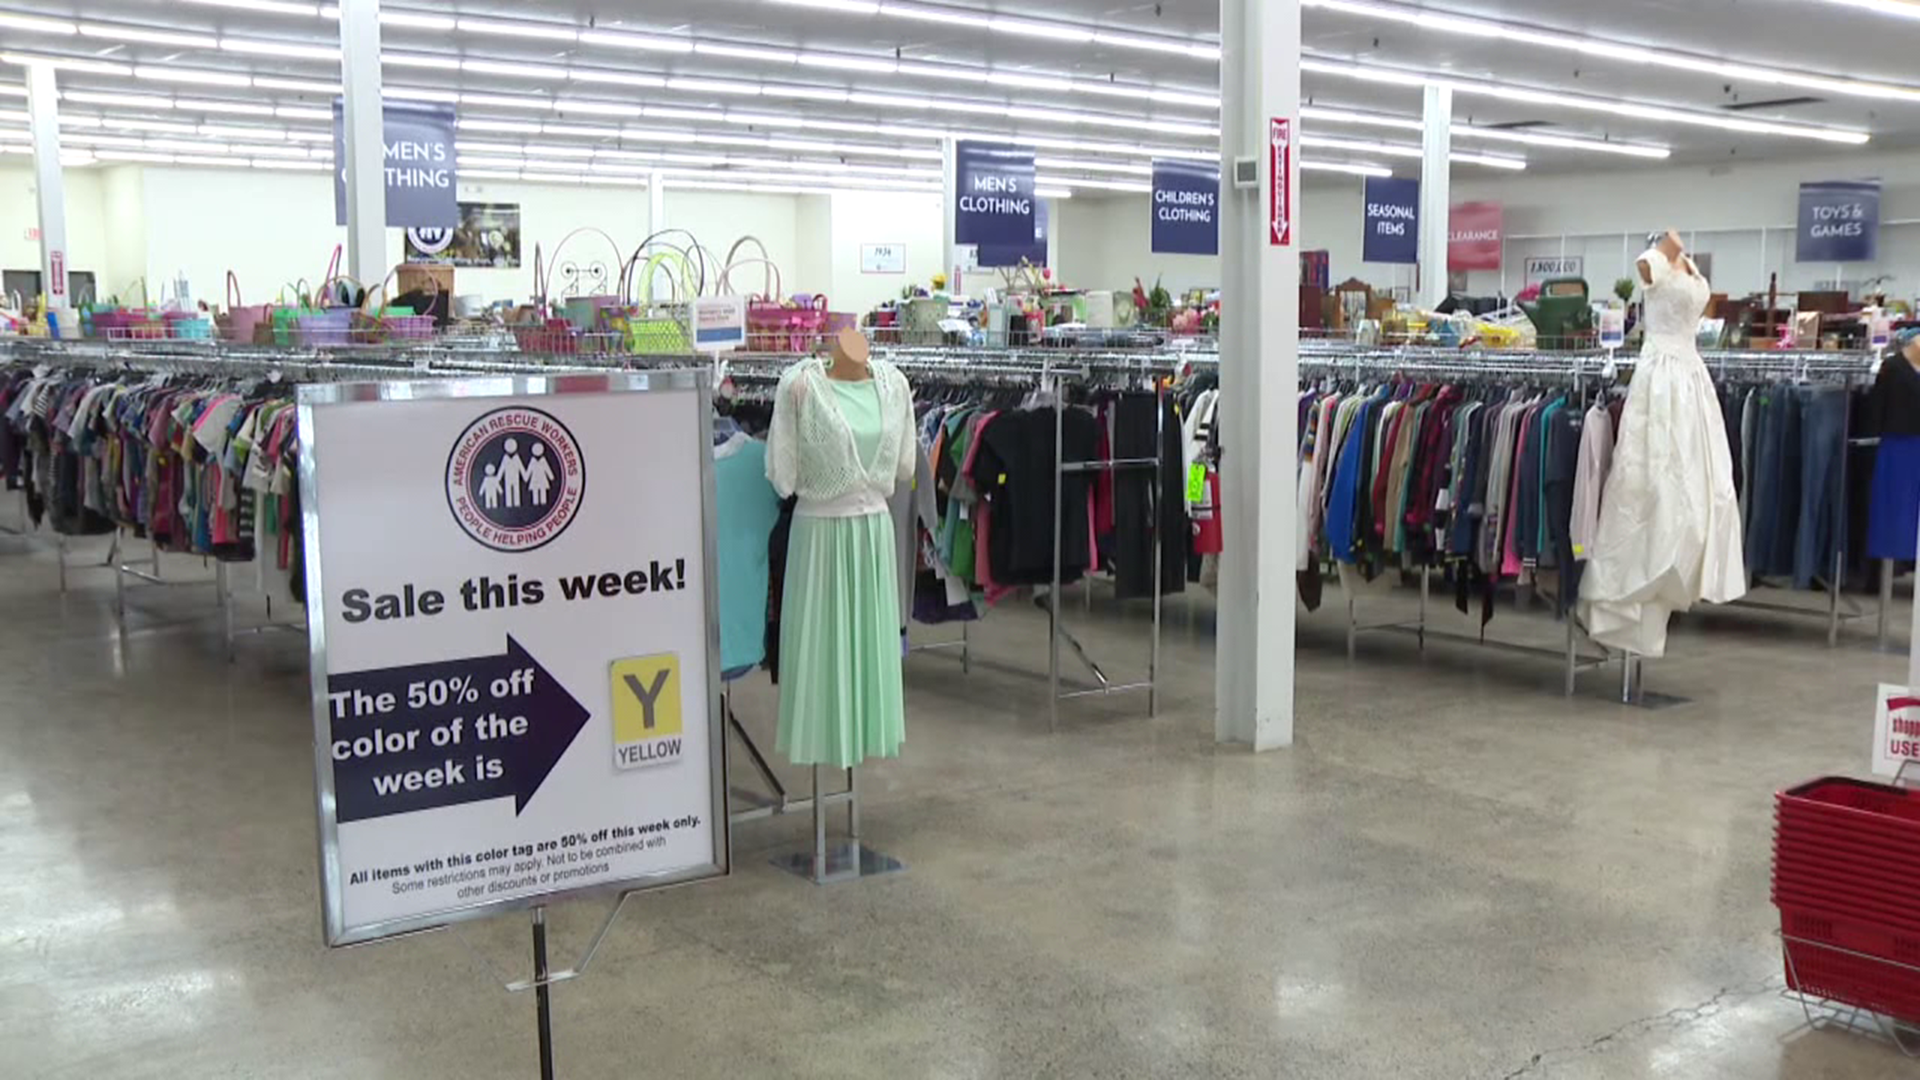 American Rescue Workers Thrift Store's grand opening is this weekend.